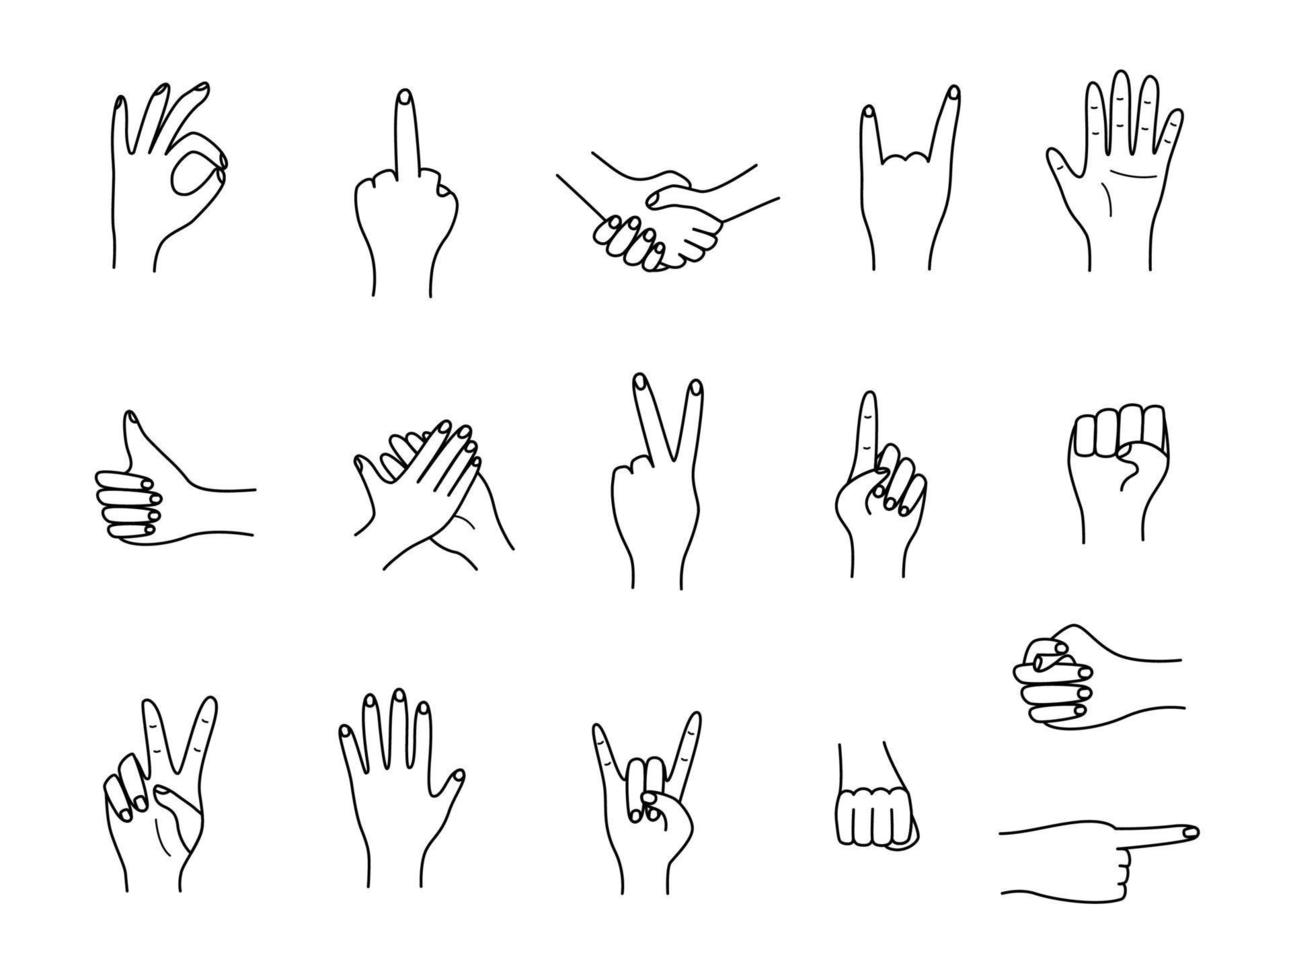 Hand gestures, vector illustration set of icons of various hand signs thin lines